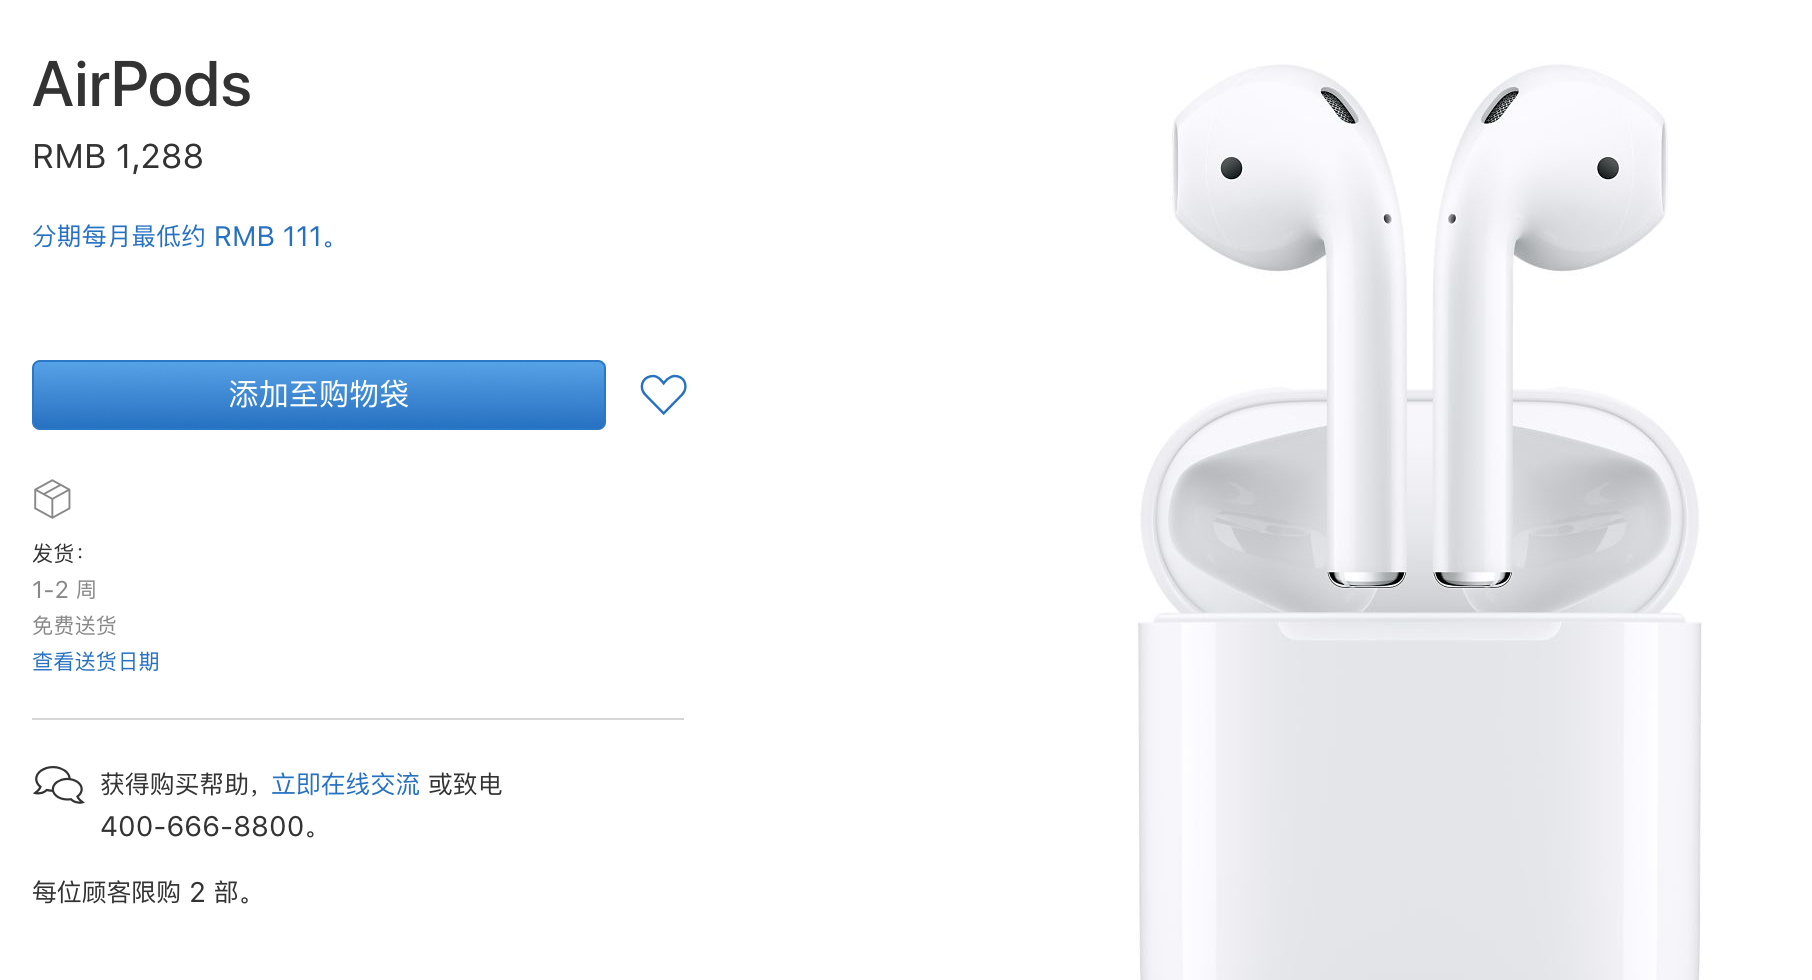 airpods shippment 3 5 business day 03